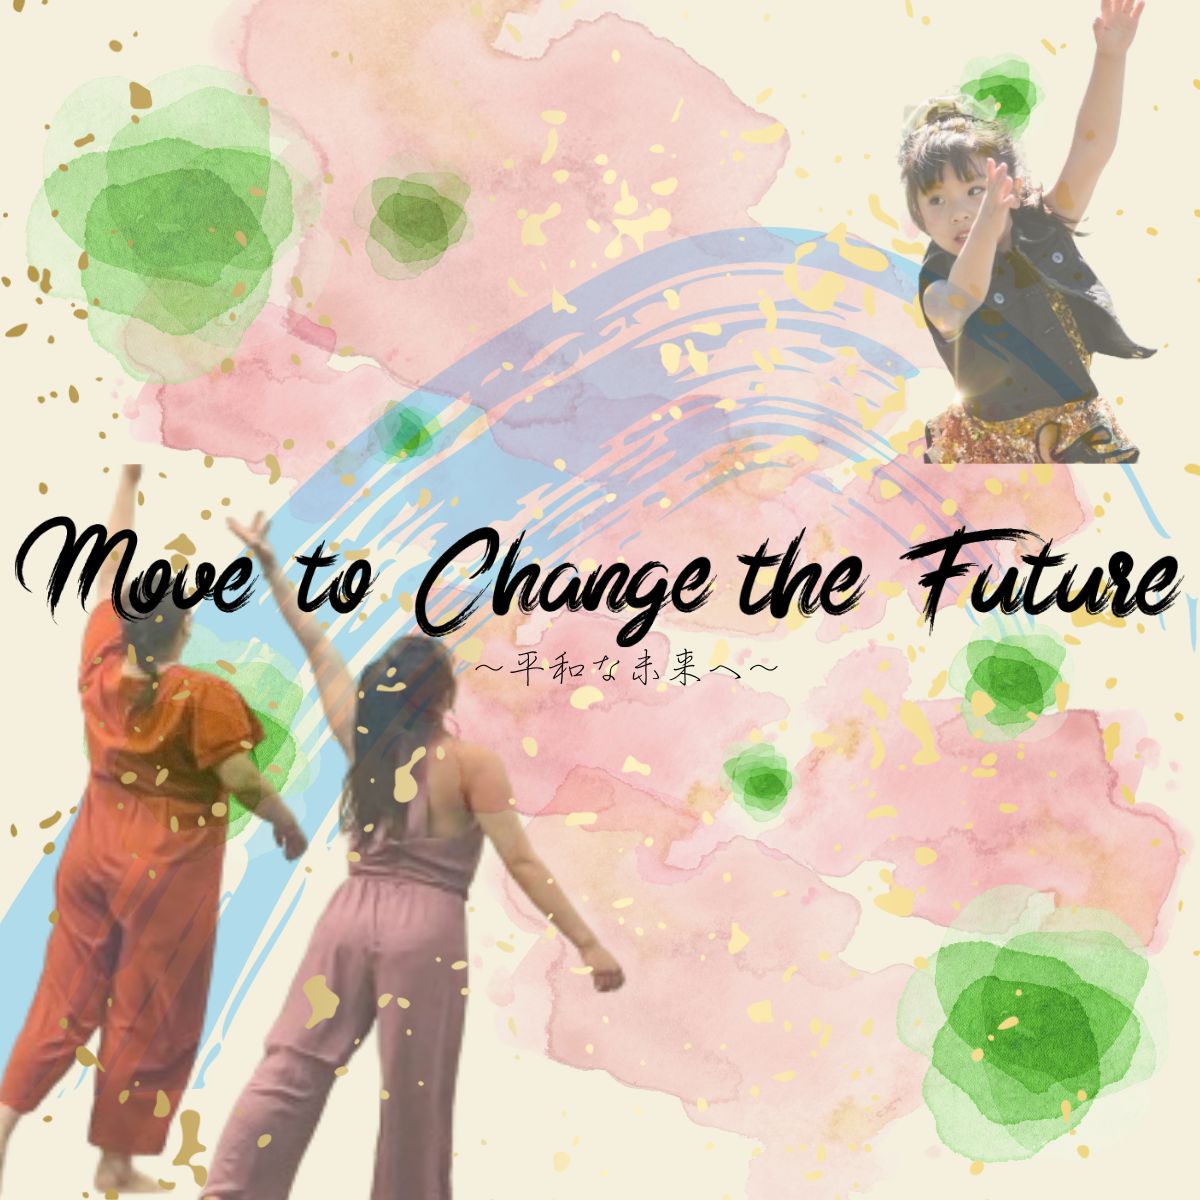 Three dancing children on a swirly colorful background with the title "Move to Change the Future"